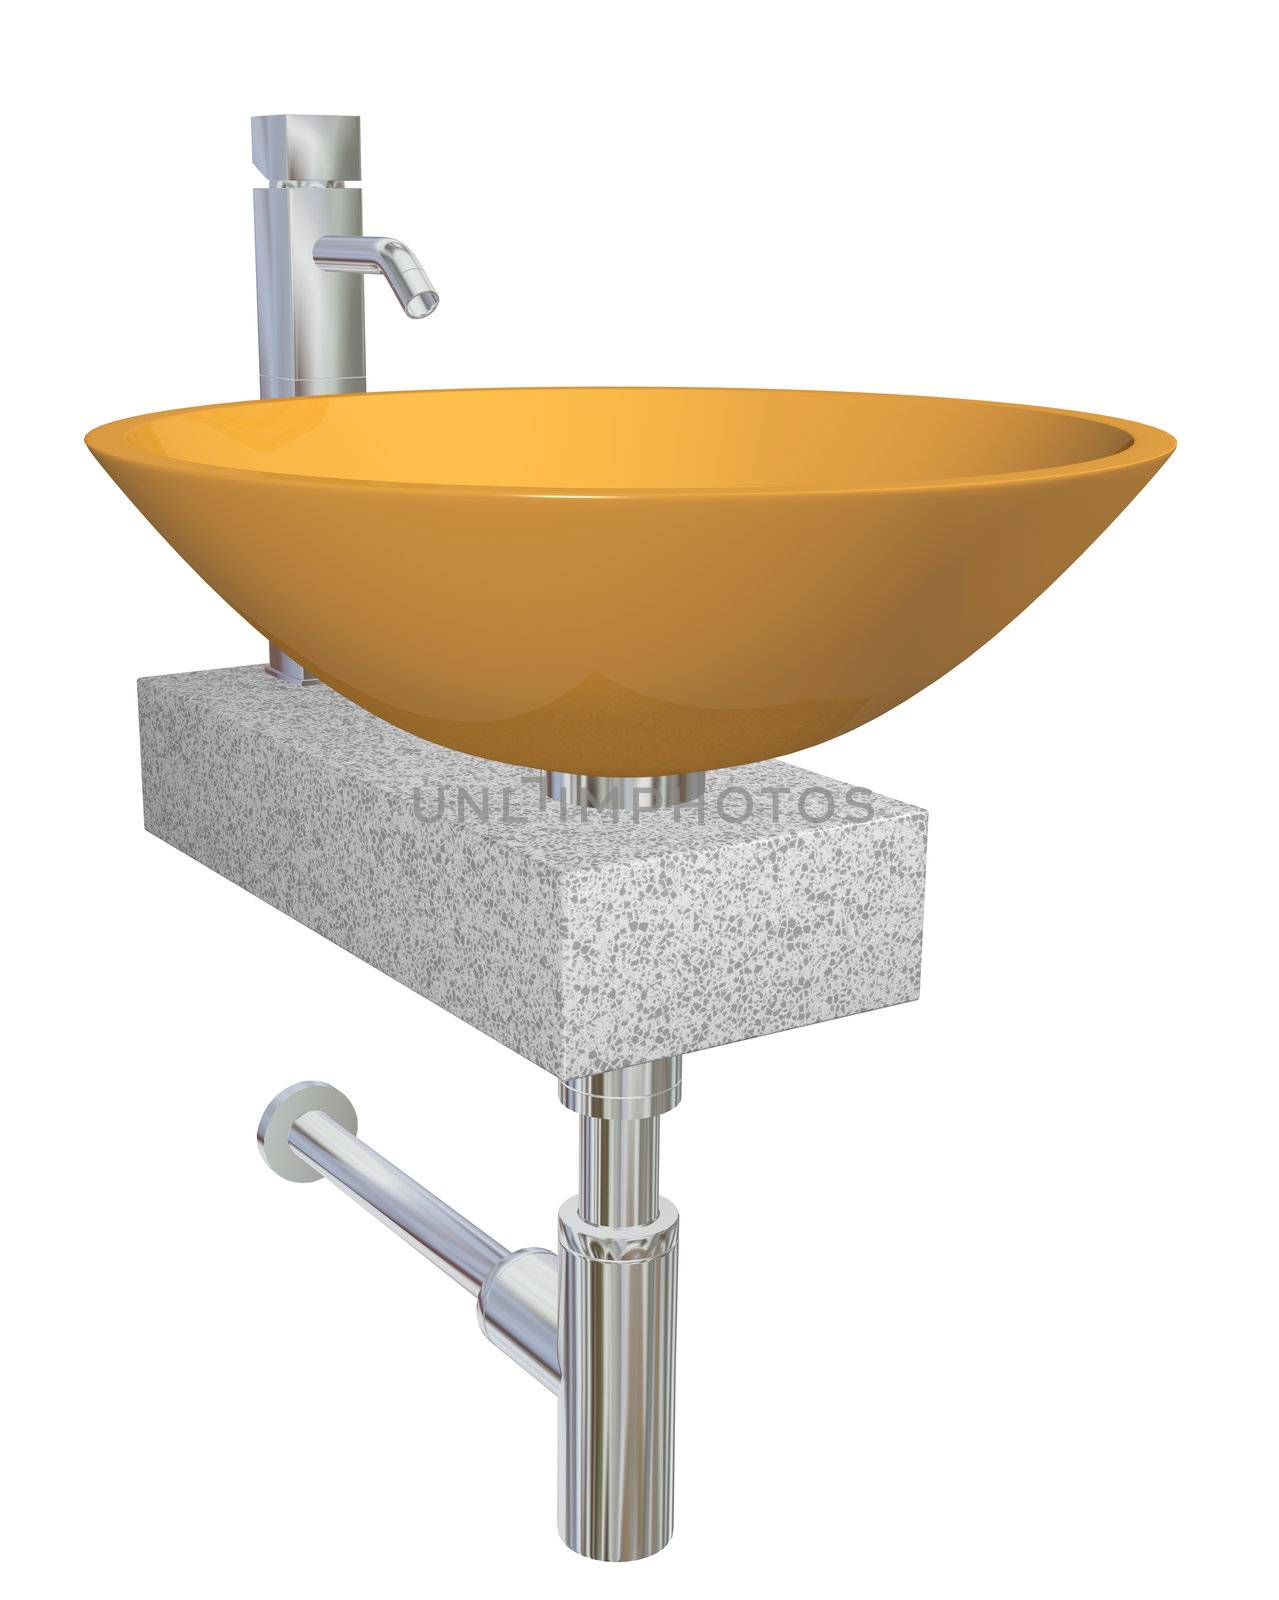 Orange bowl glass or ceramic sink with chrome faucet and plumbing fixtures, sitting on a granite table or slab, isolated against a white background